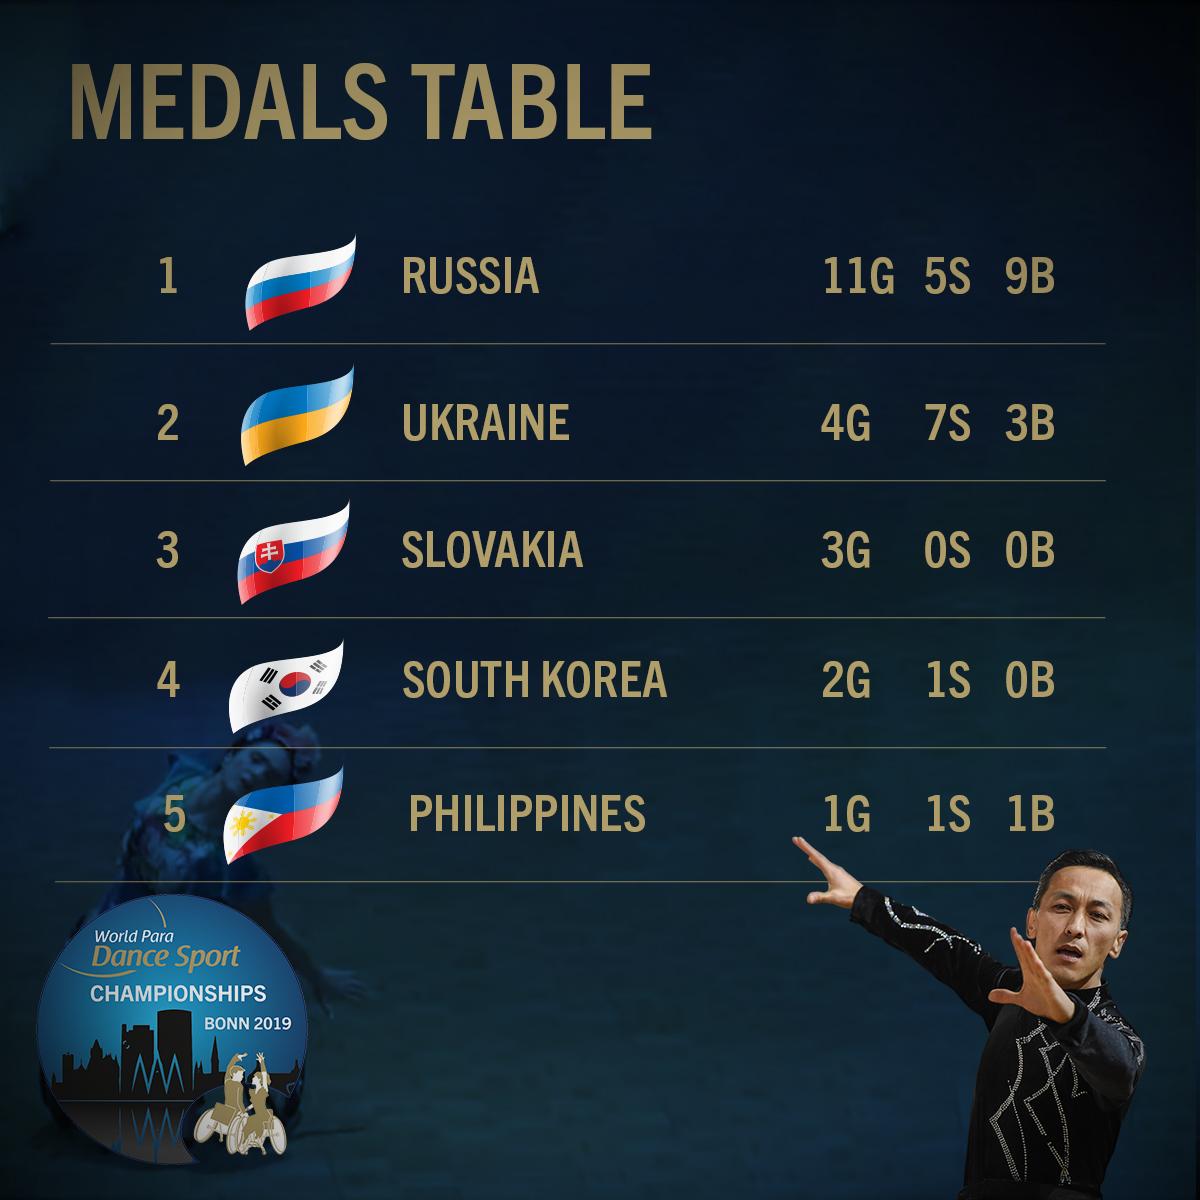 Medals table of World Para Dance Sport Championships